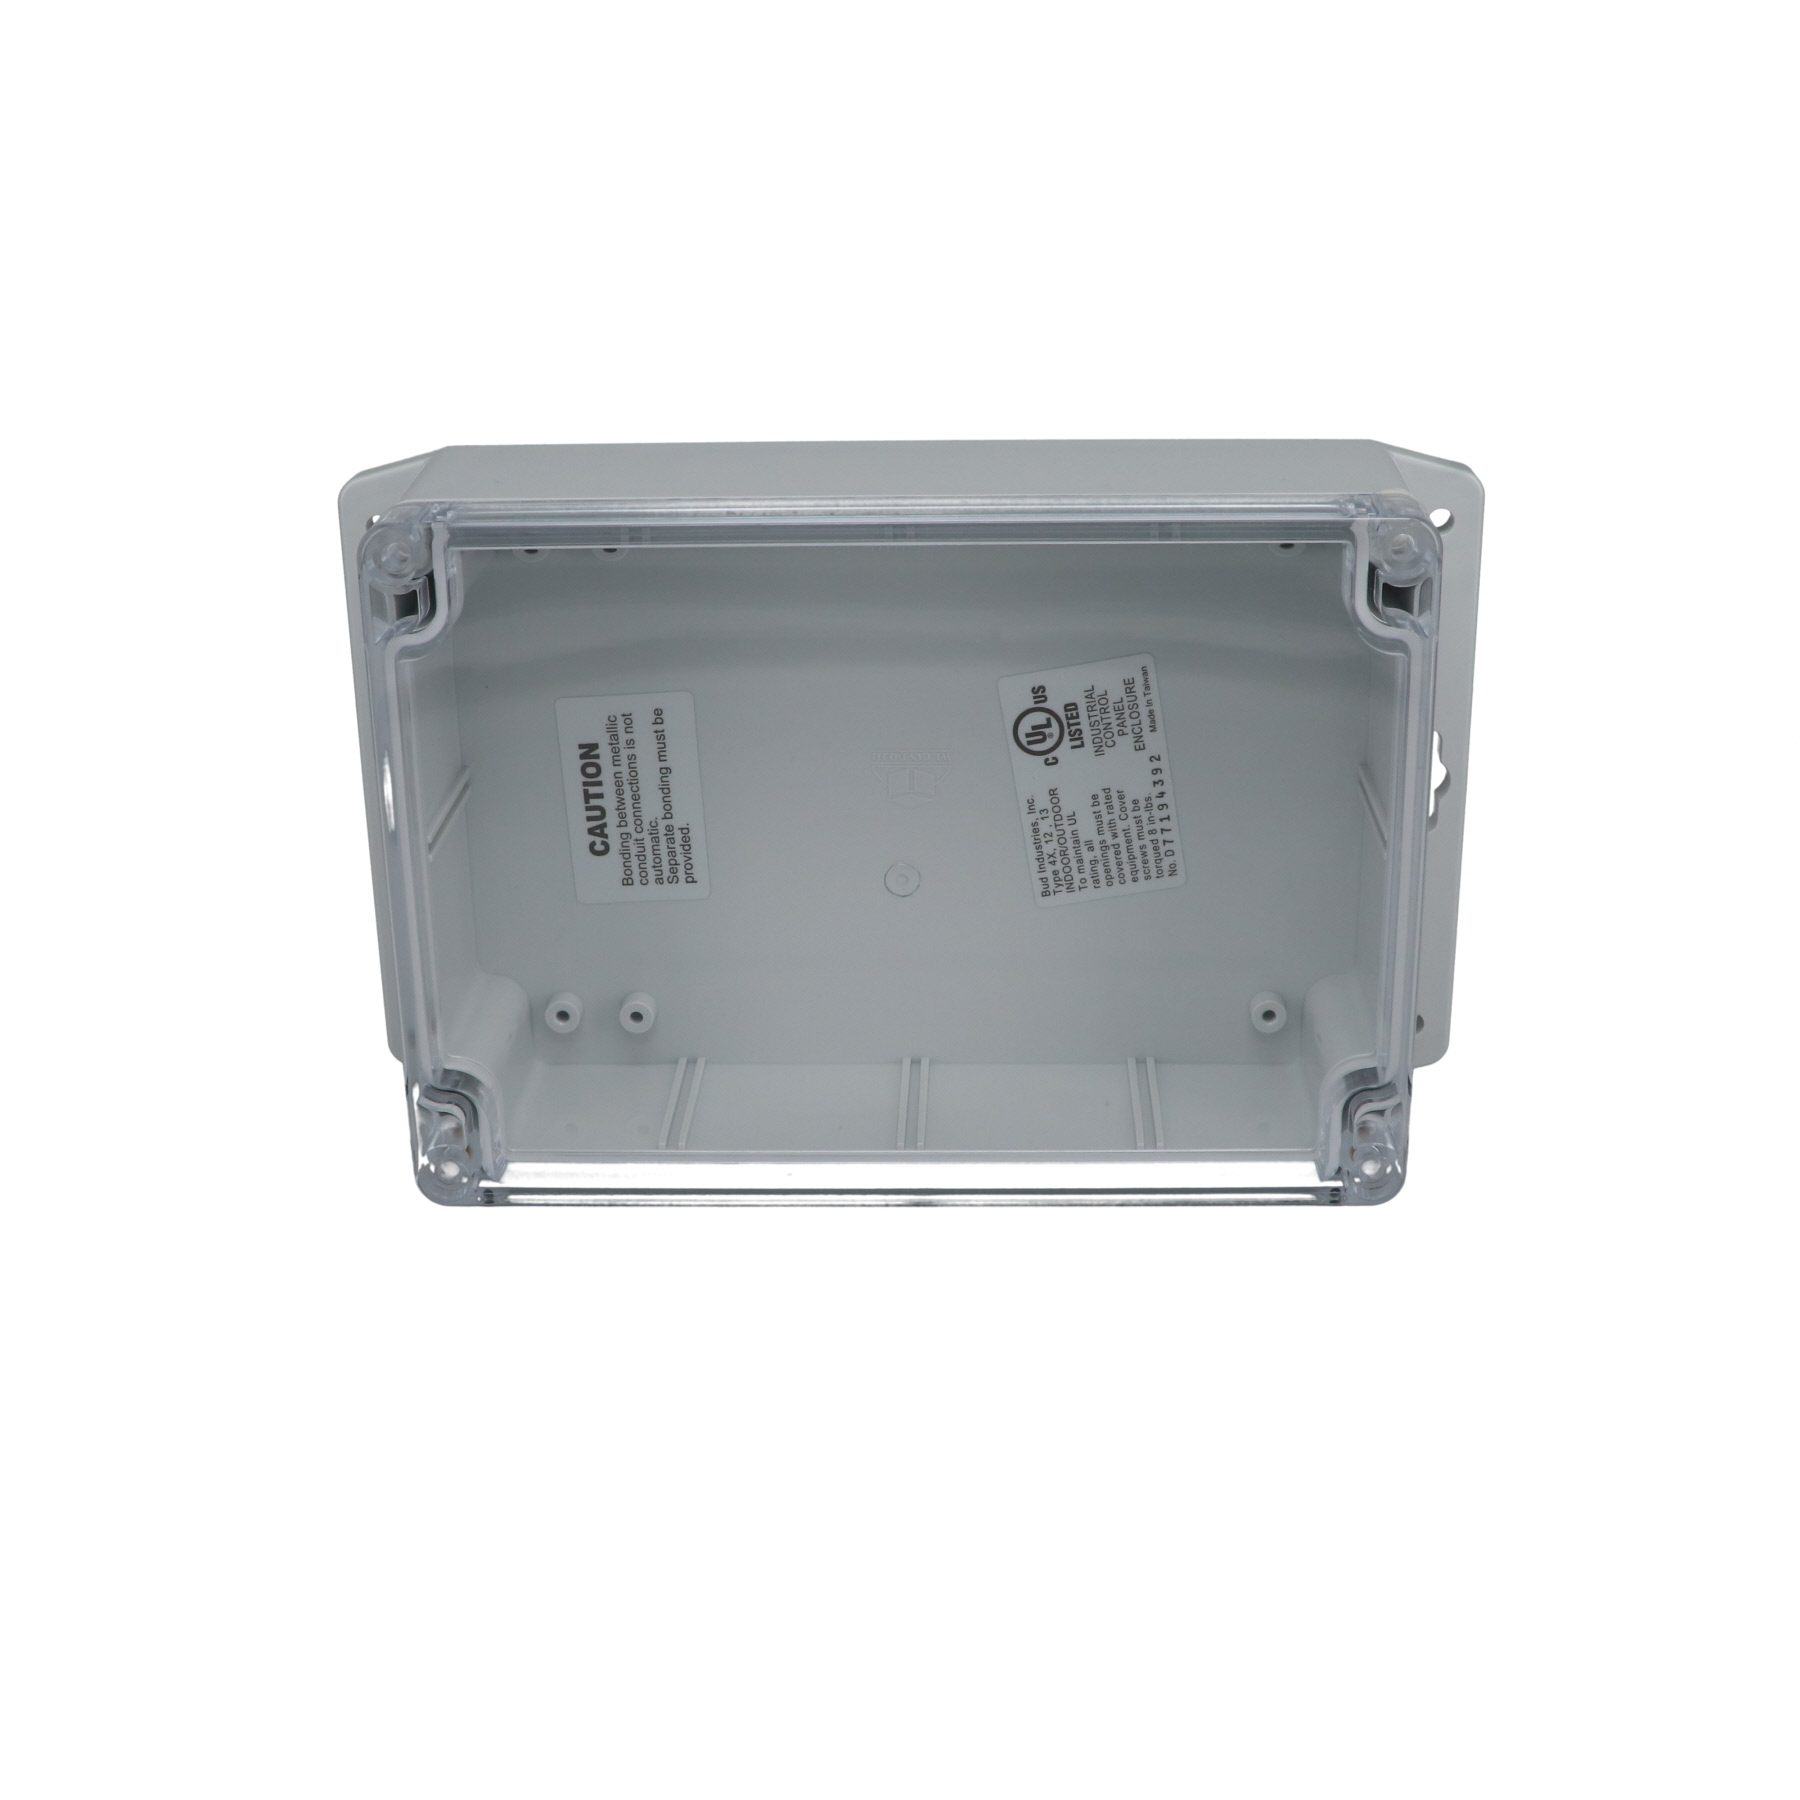 IP65 NEMA 4X Box with Clear Cover and Mounting Brackets PN-1324-CMB